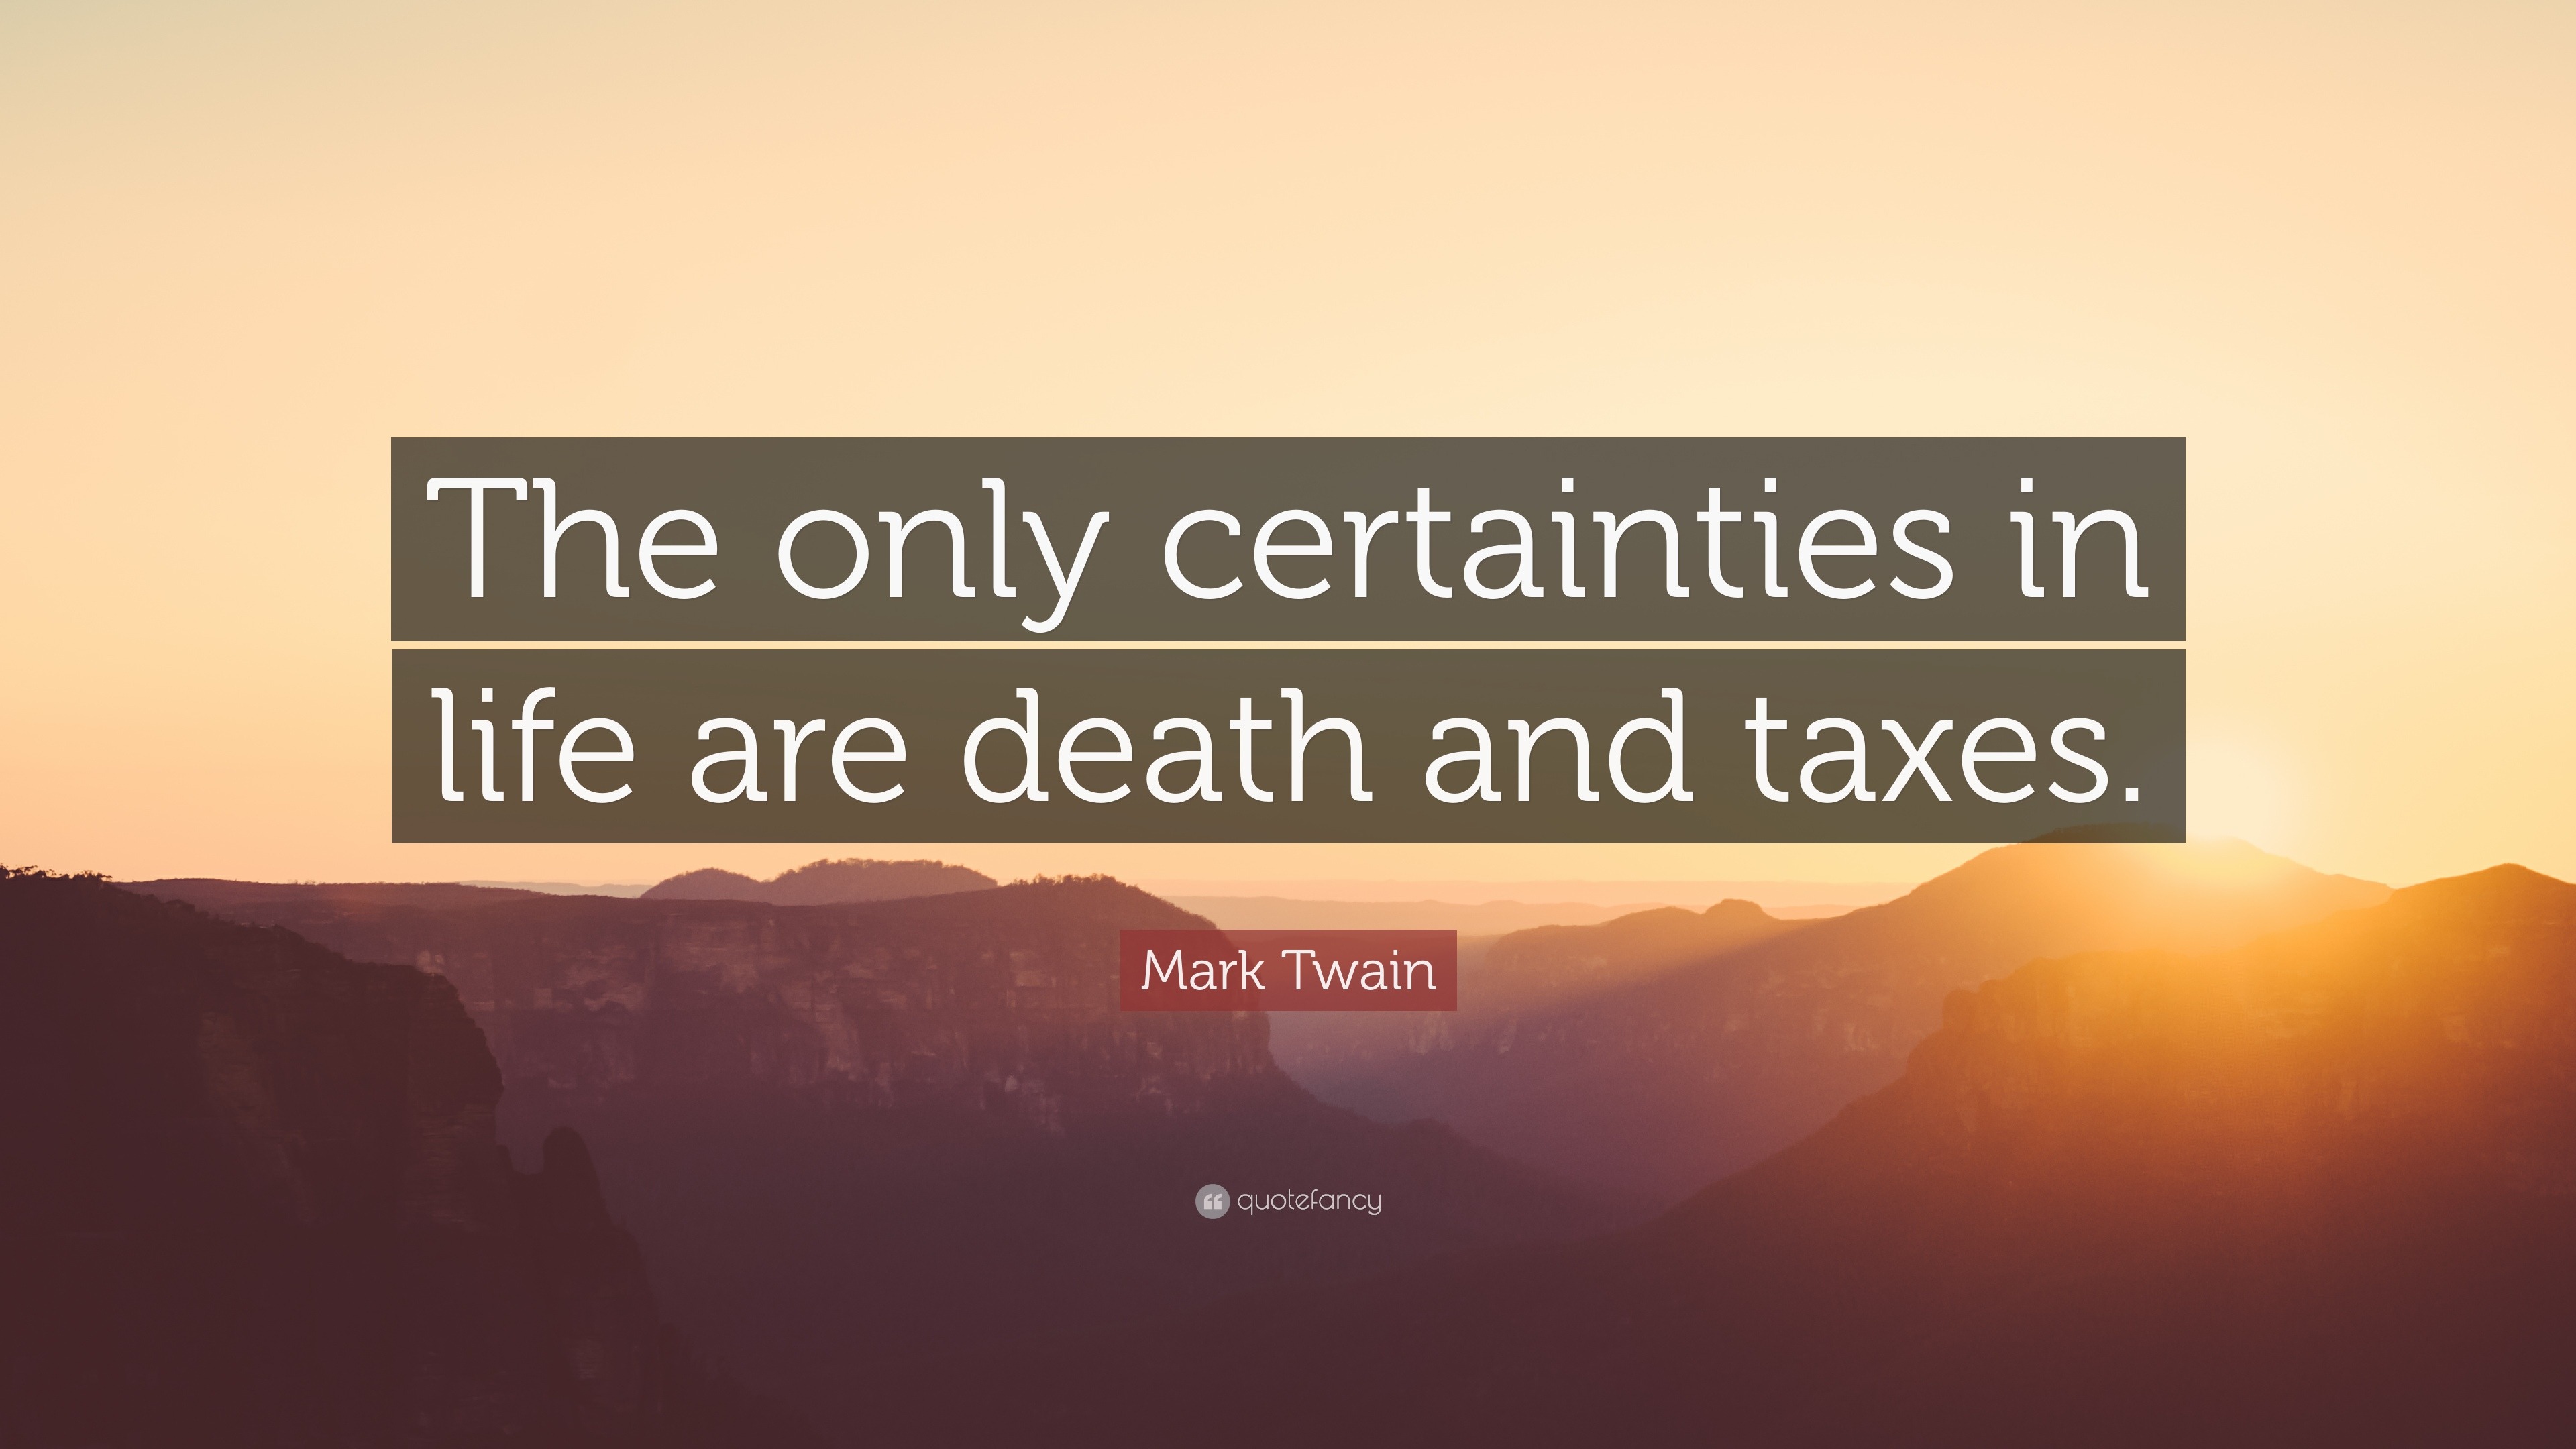 Mark Twain Quote “The only certainties in life are and taxes ”